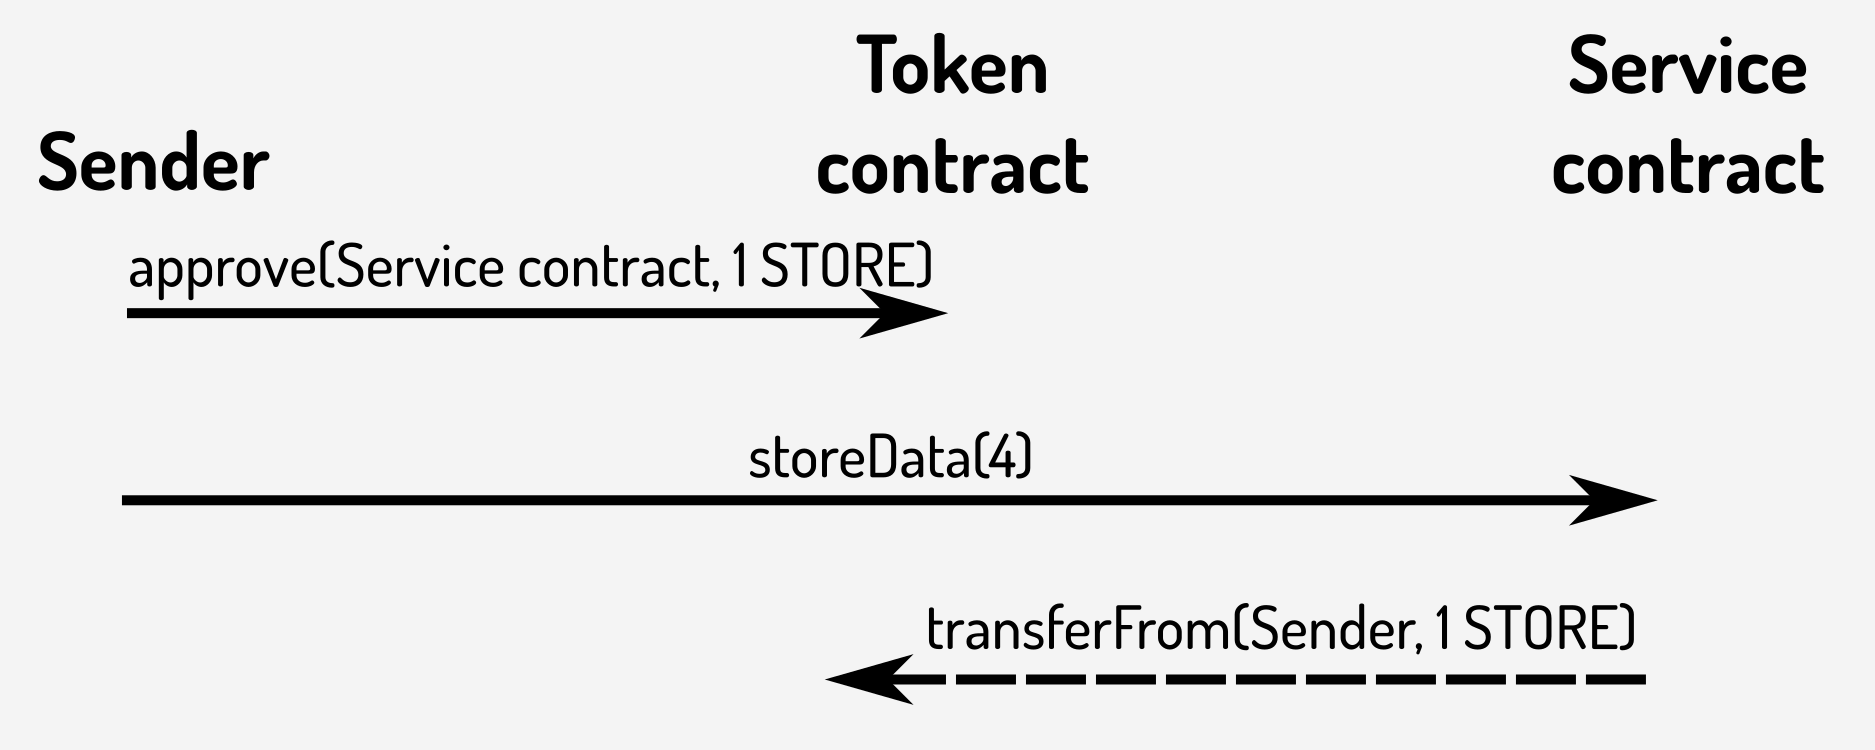 Using approve() to pay for a service contract function with a token